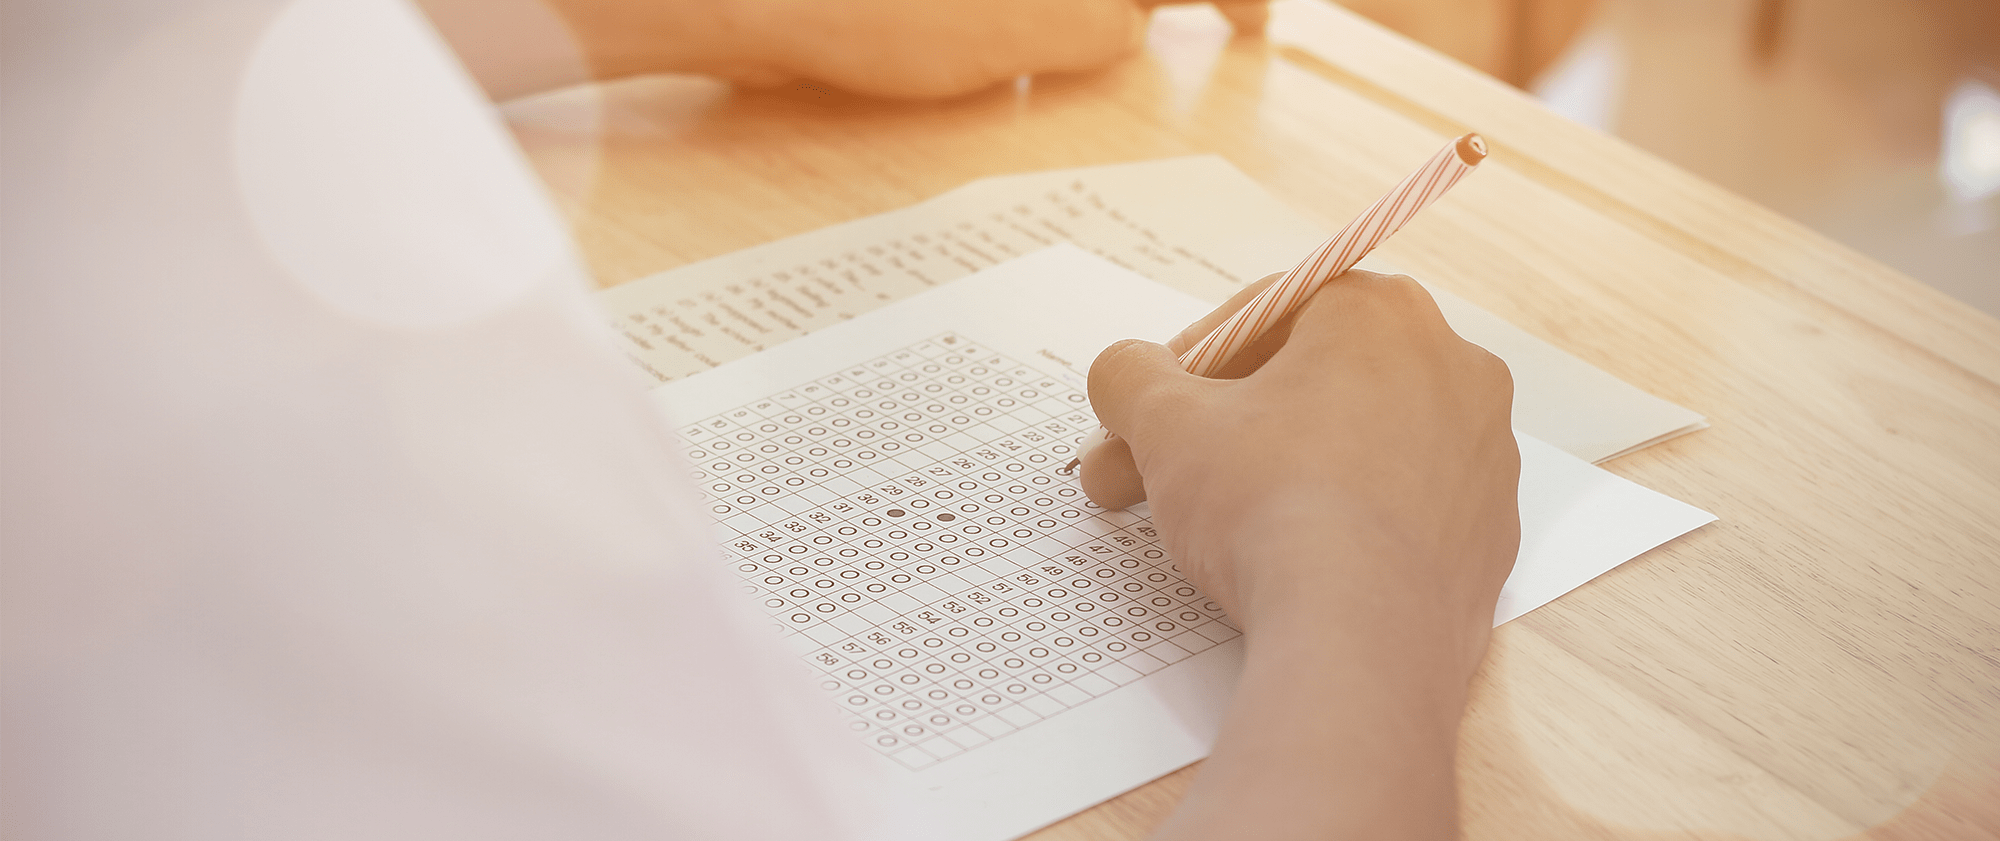 Closeup of student filling in a bubble on a test sheet